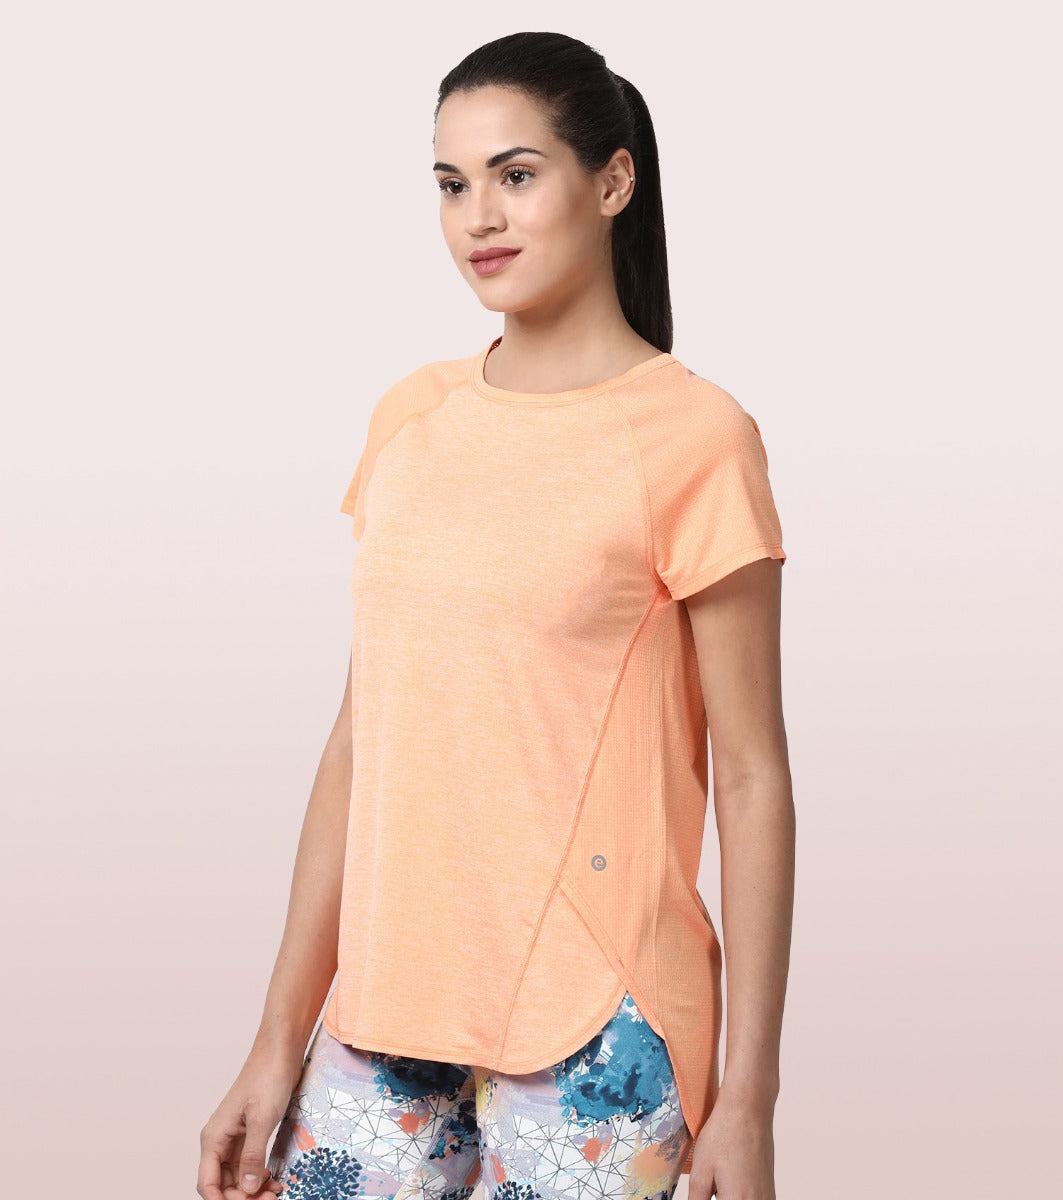 Athleisure Spin With Me Tee